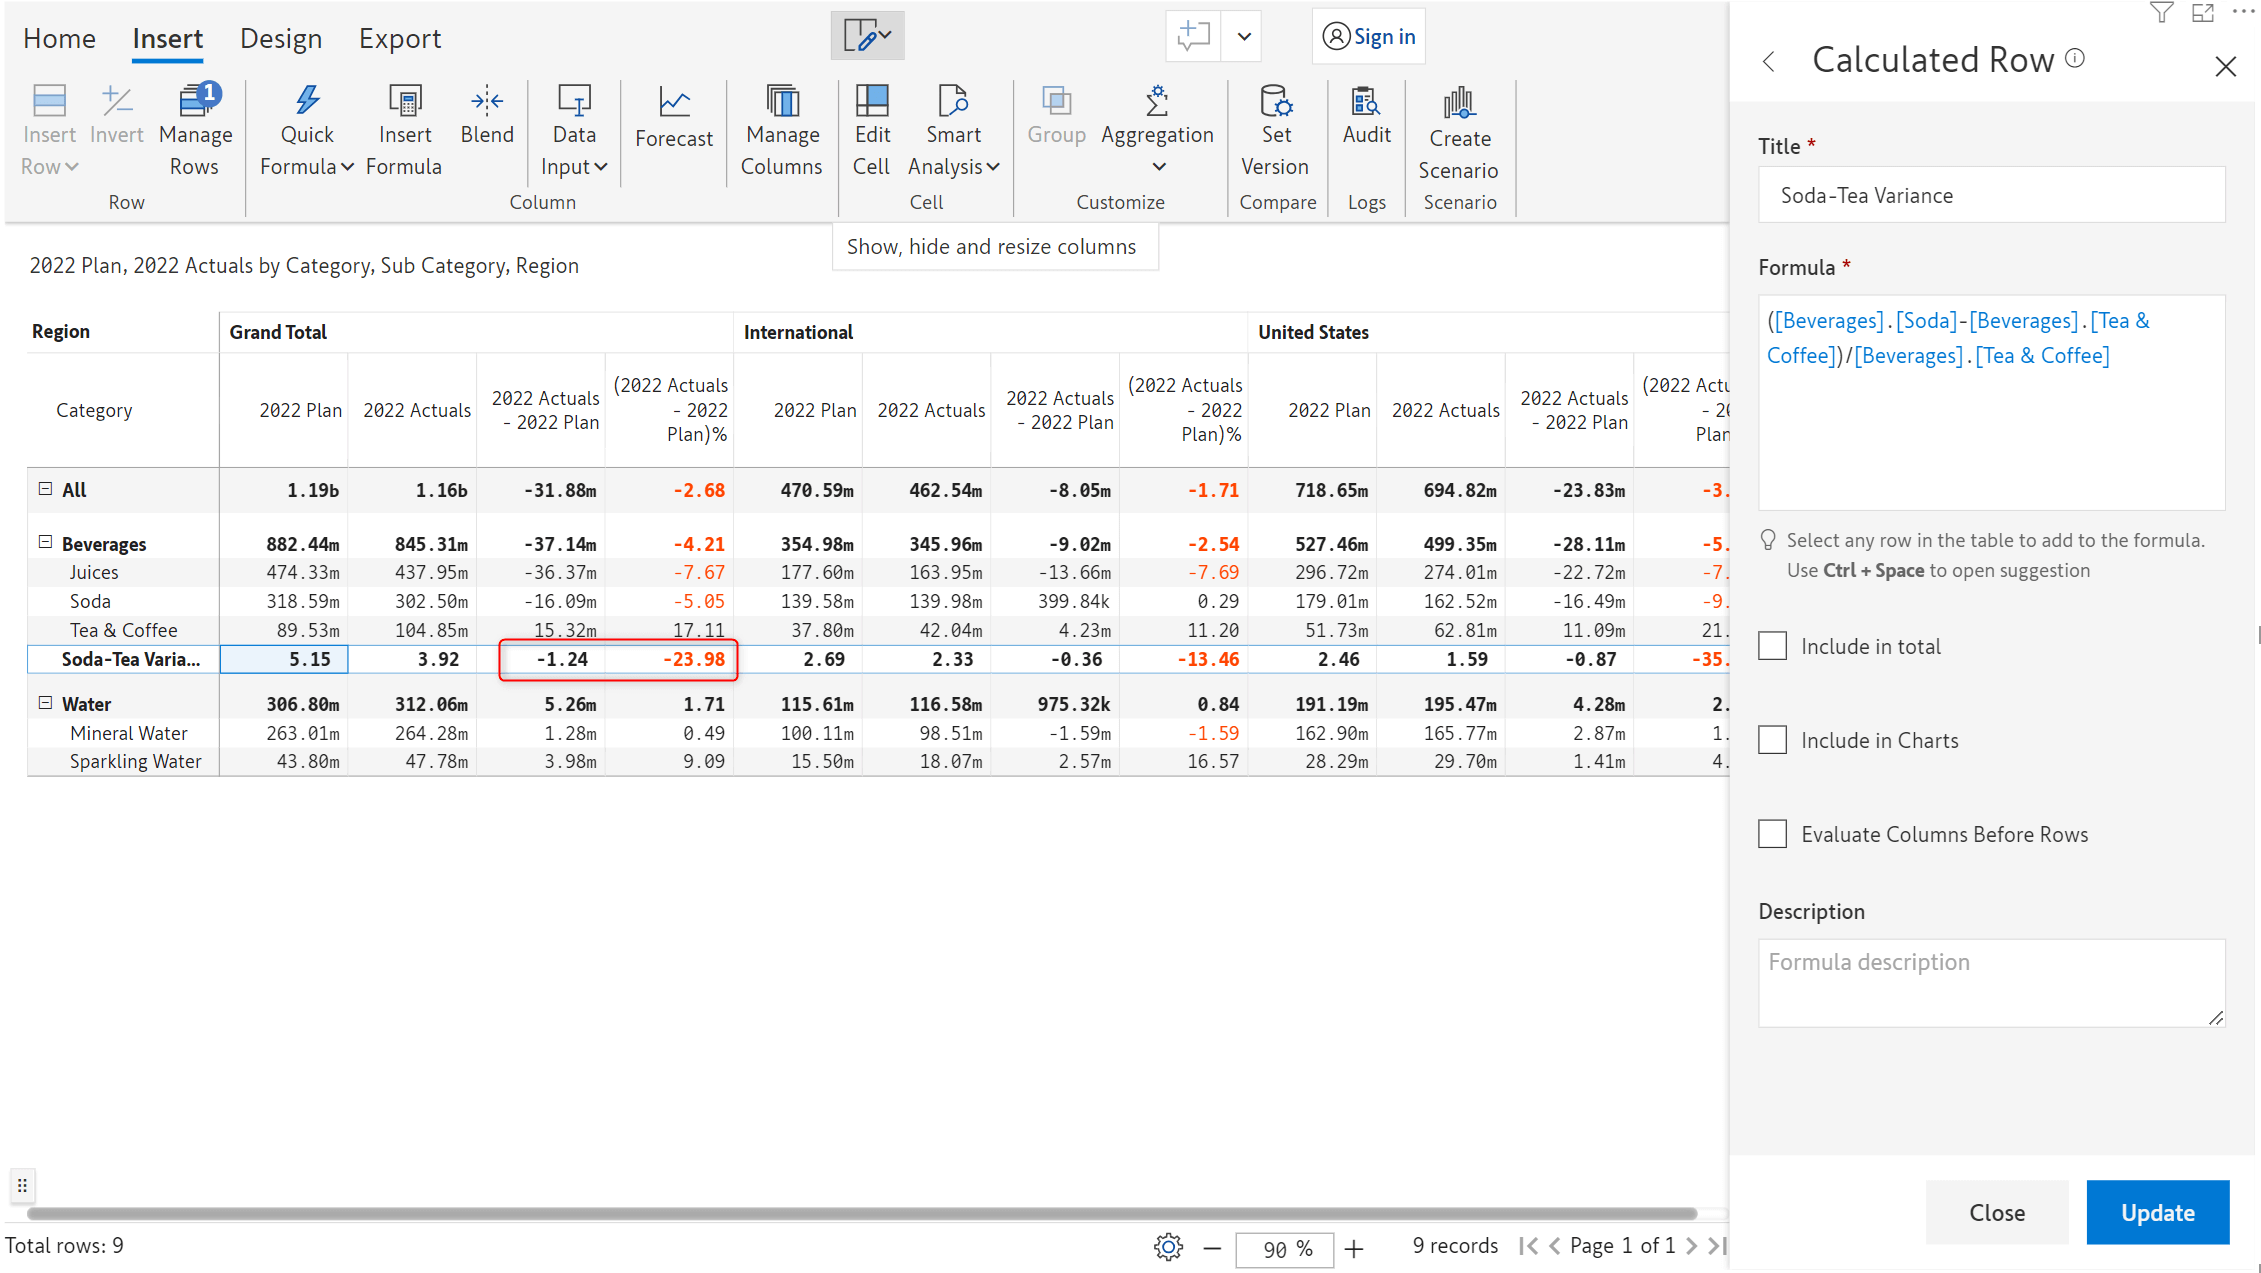 Evaluate columns before rows - disabled